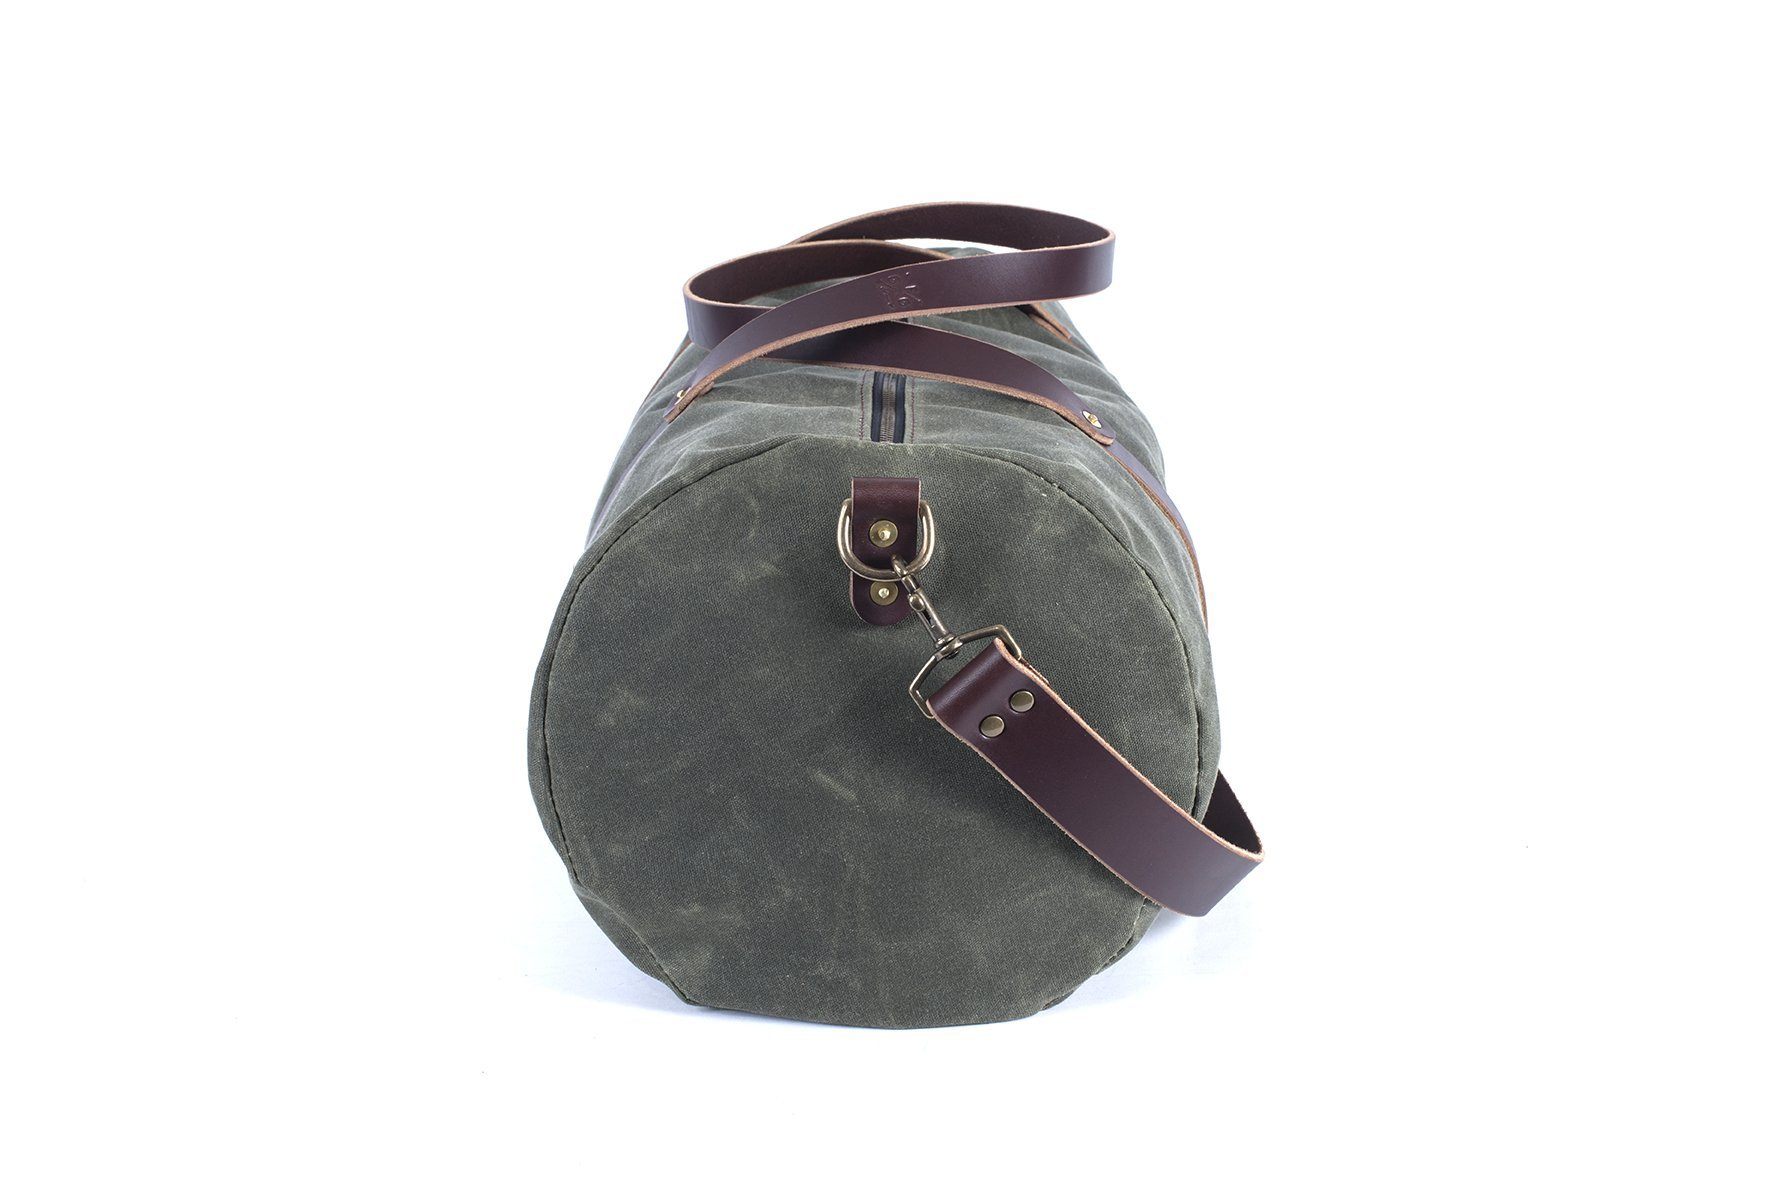 Waxed Canvas and Leather Duffle Bag - USA Crafted - Olive and Saddle